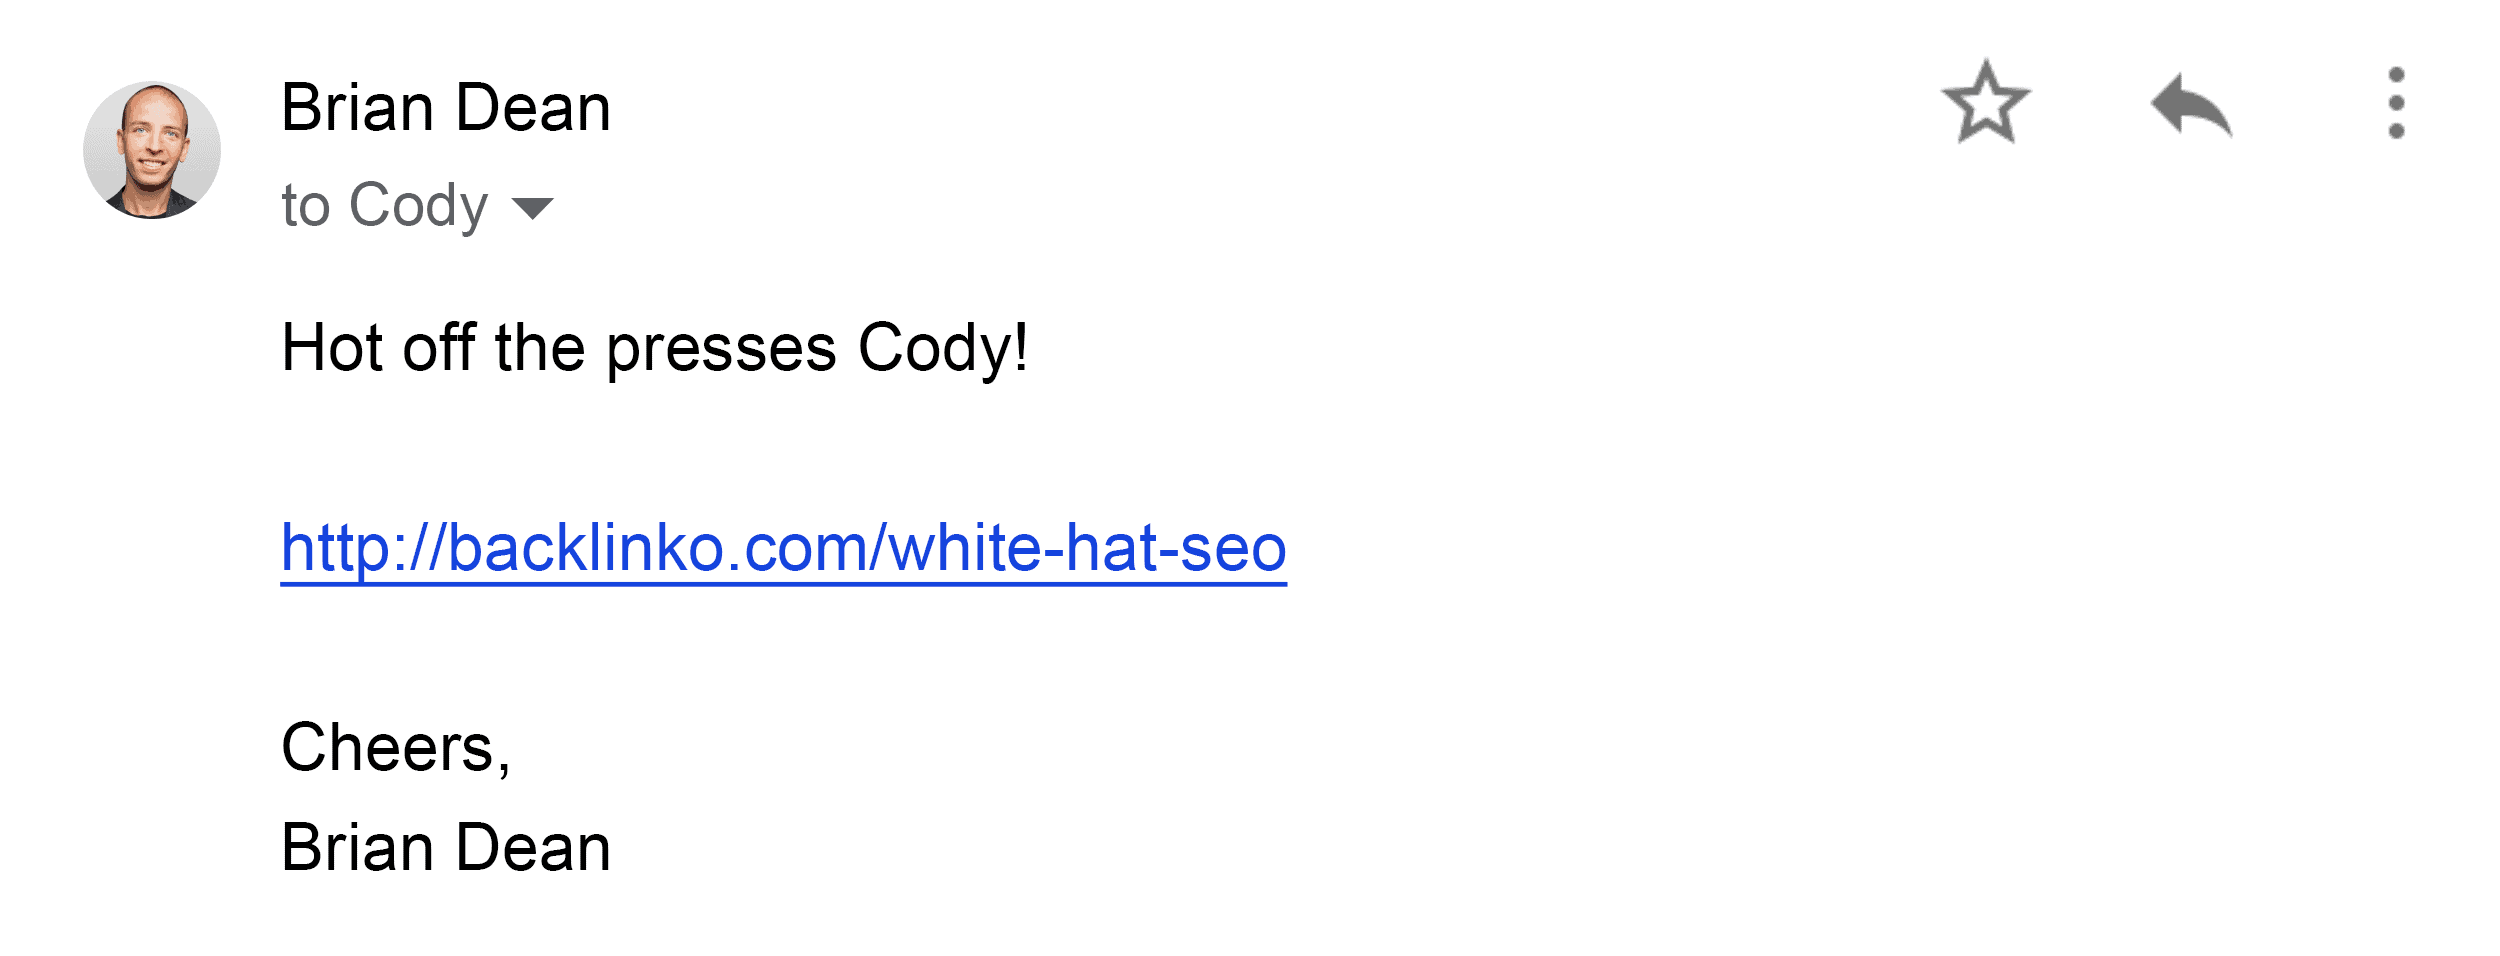 White hat SEO – Outreach email reply